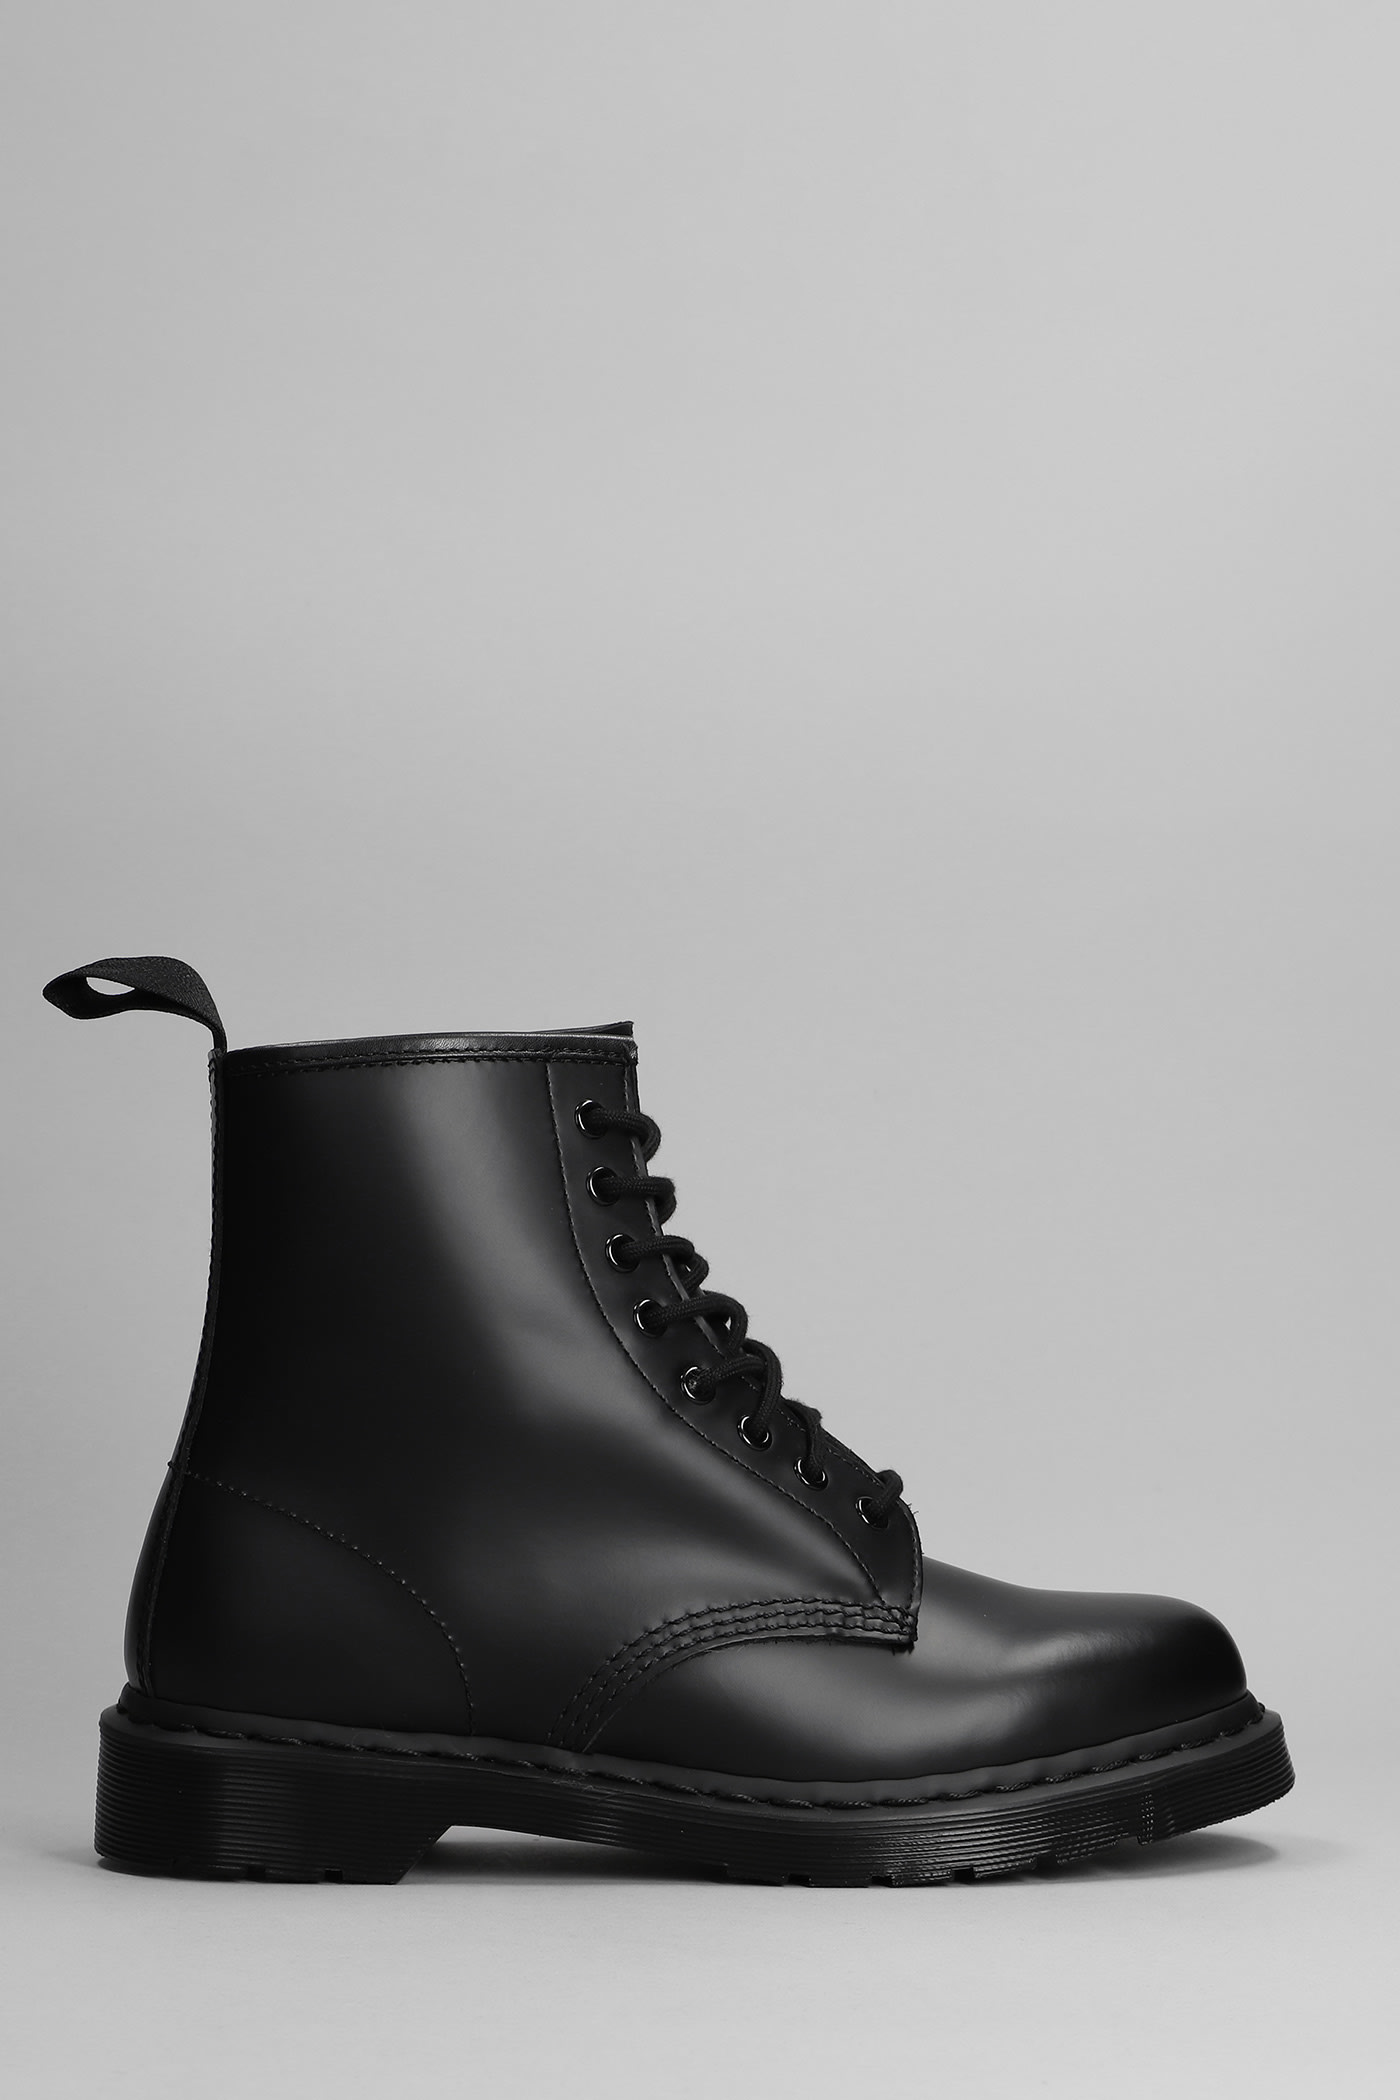 Dr. Martens 1460 Combat Boots In Black Leather